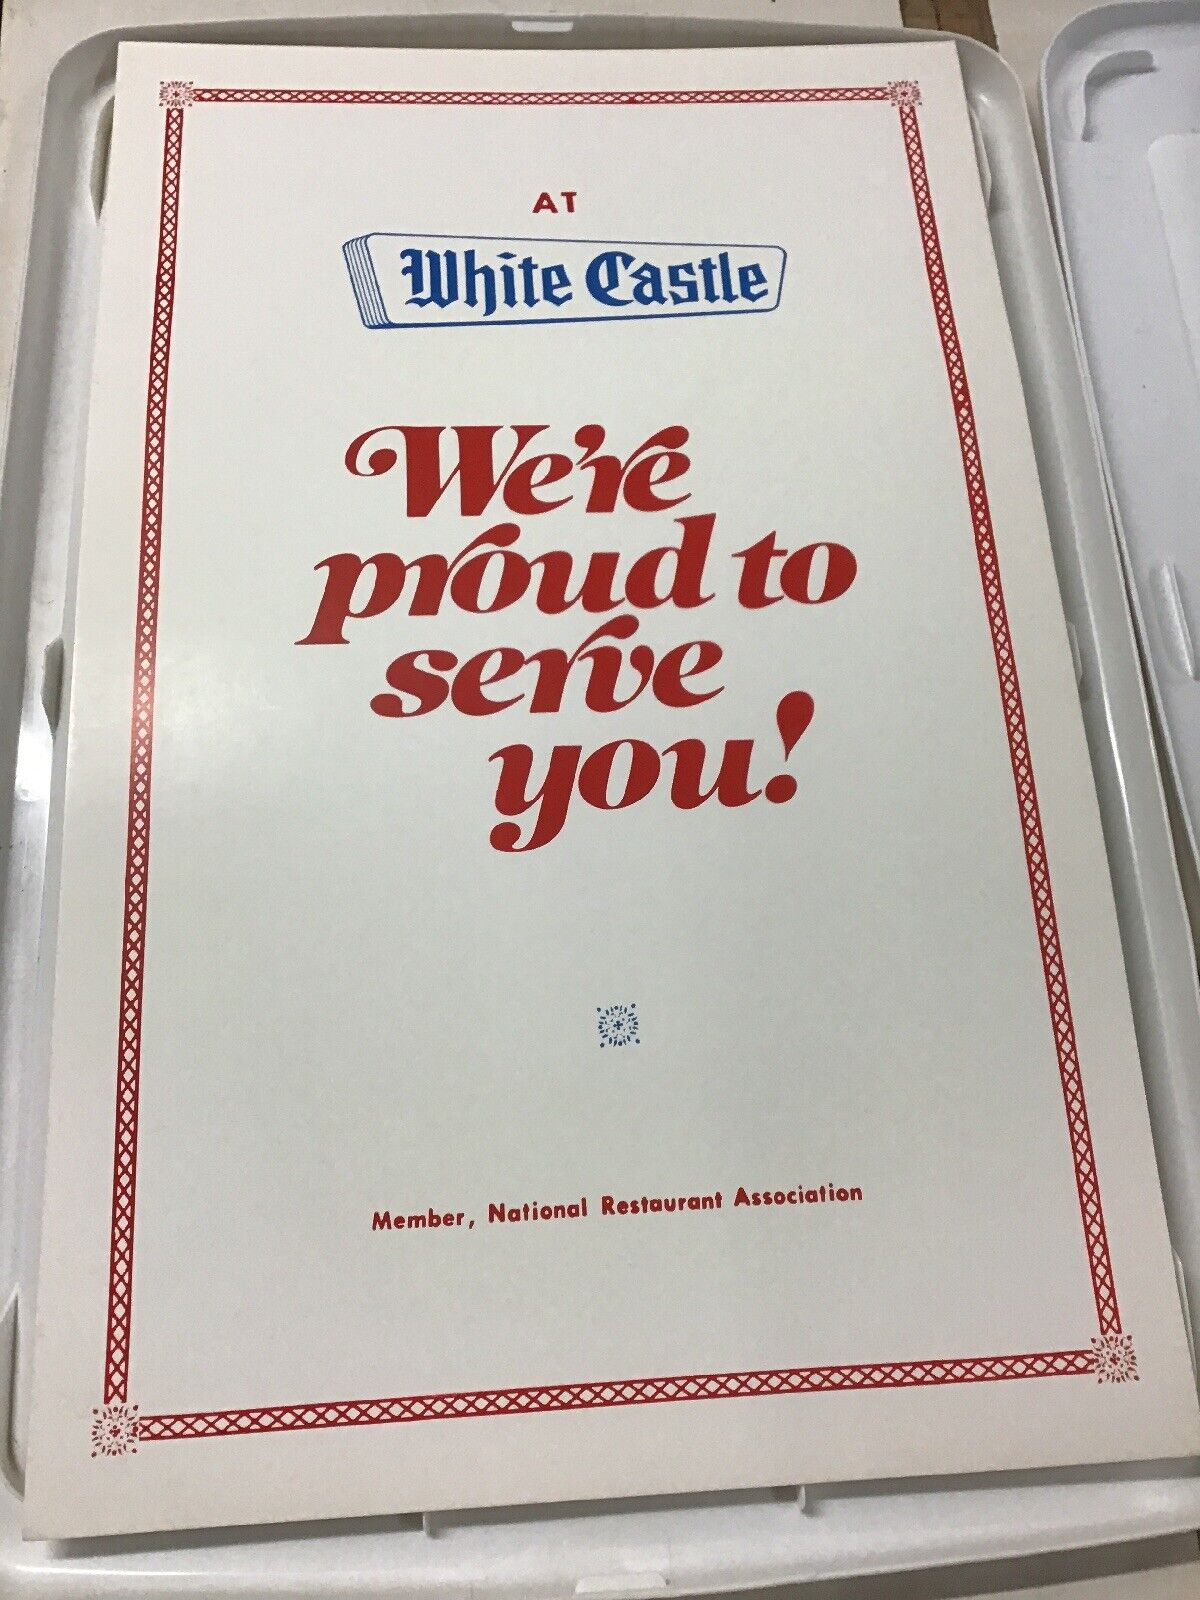 Vint White Castle Restaurant 14”x22” Advertising Poster We’re Proud To Serve You